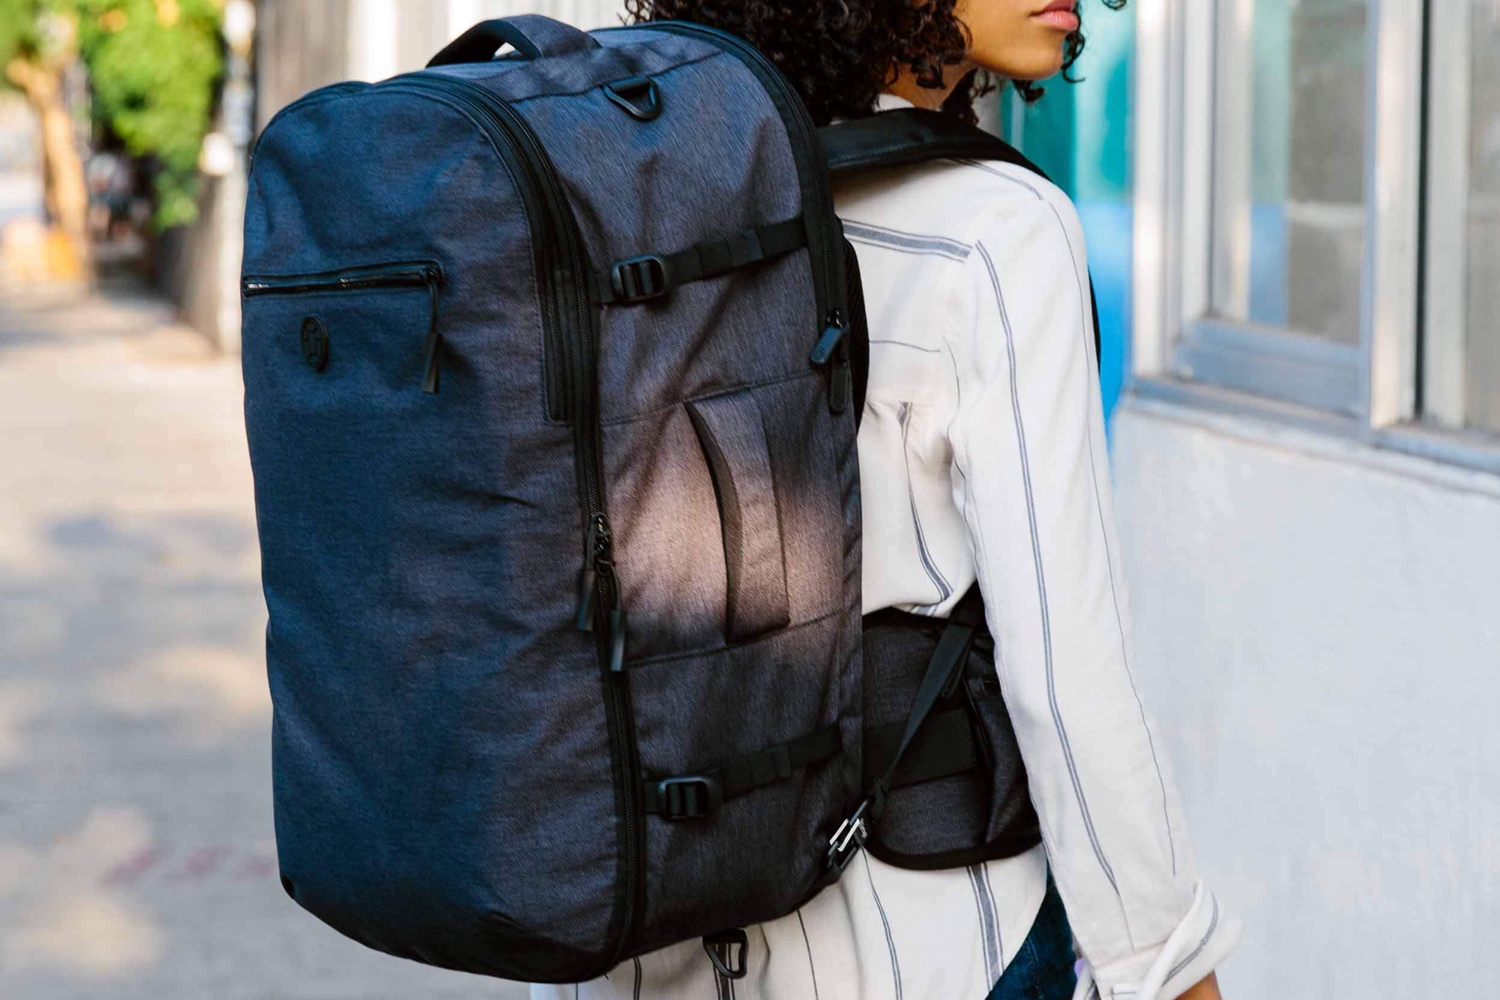 The Tortuga Setout backpack worn by a woman.